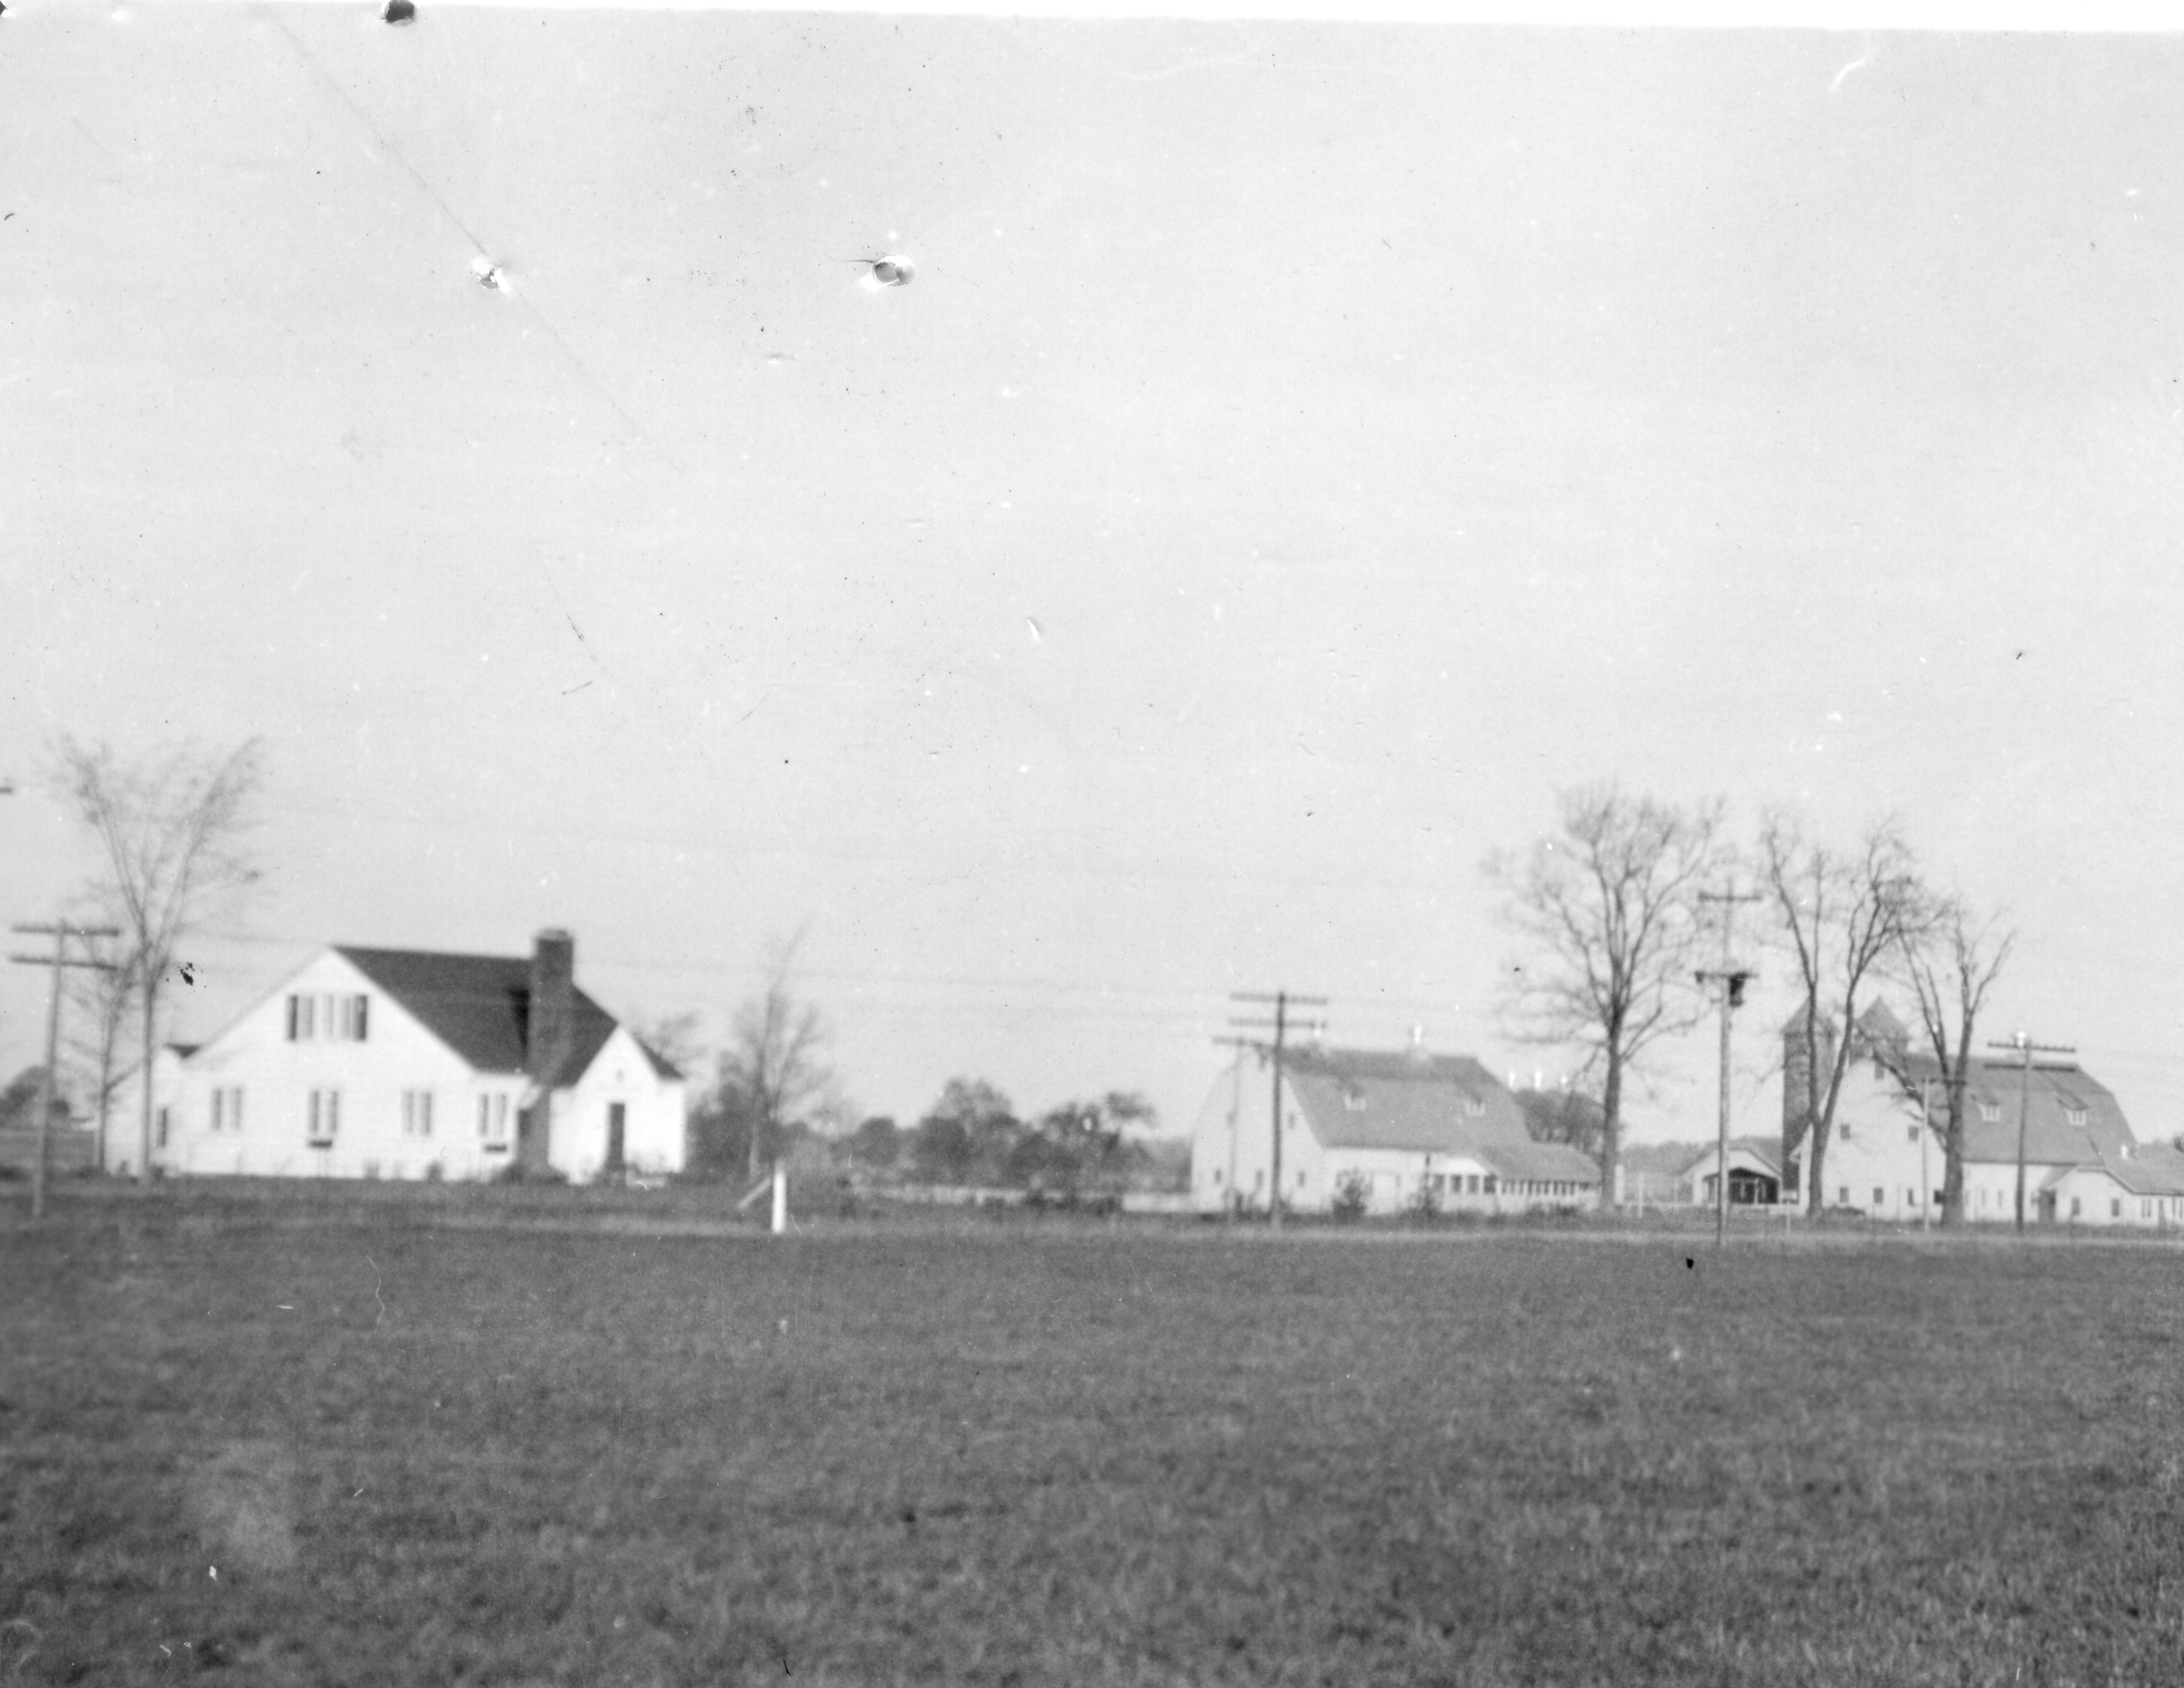 Photograph of the McCrary family farm home